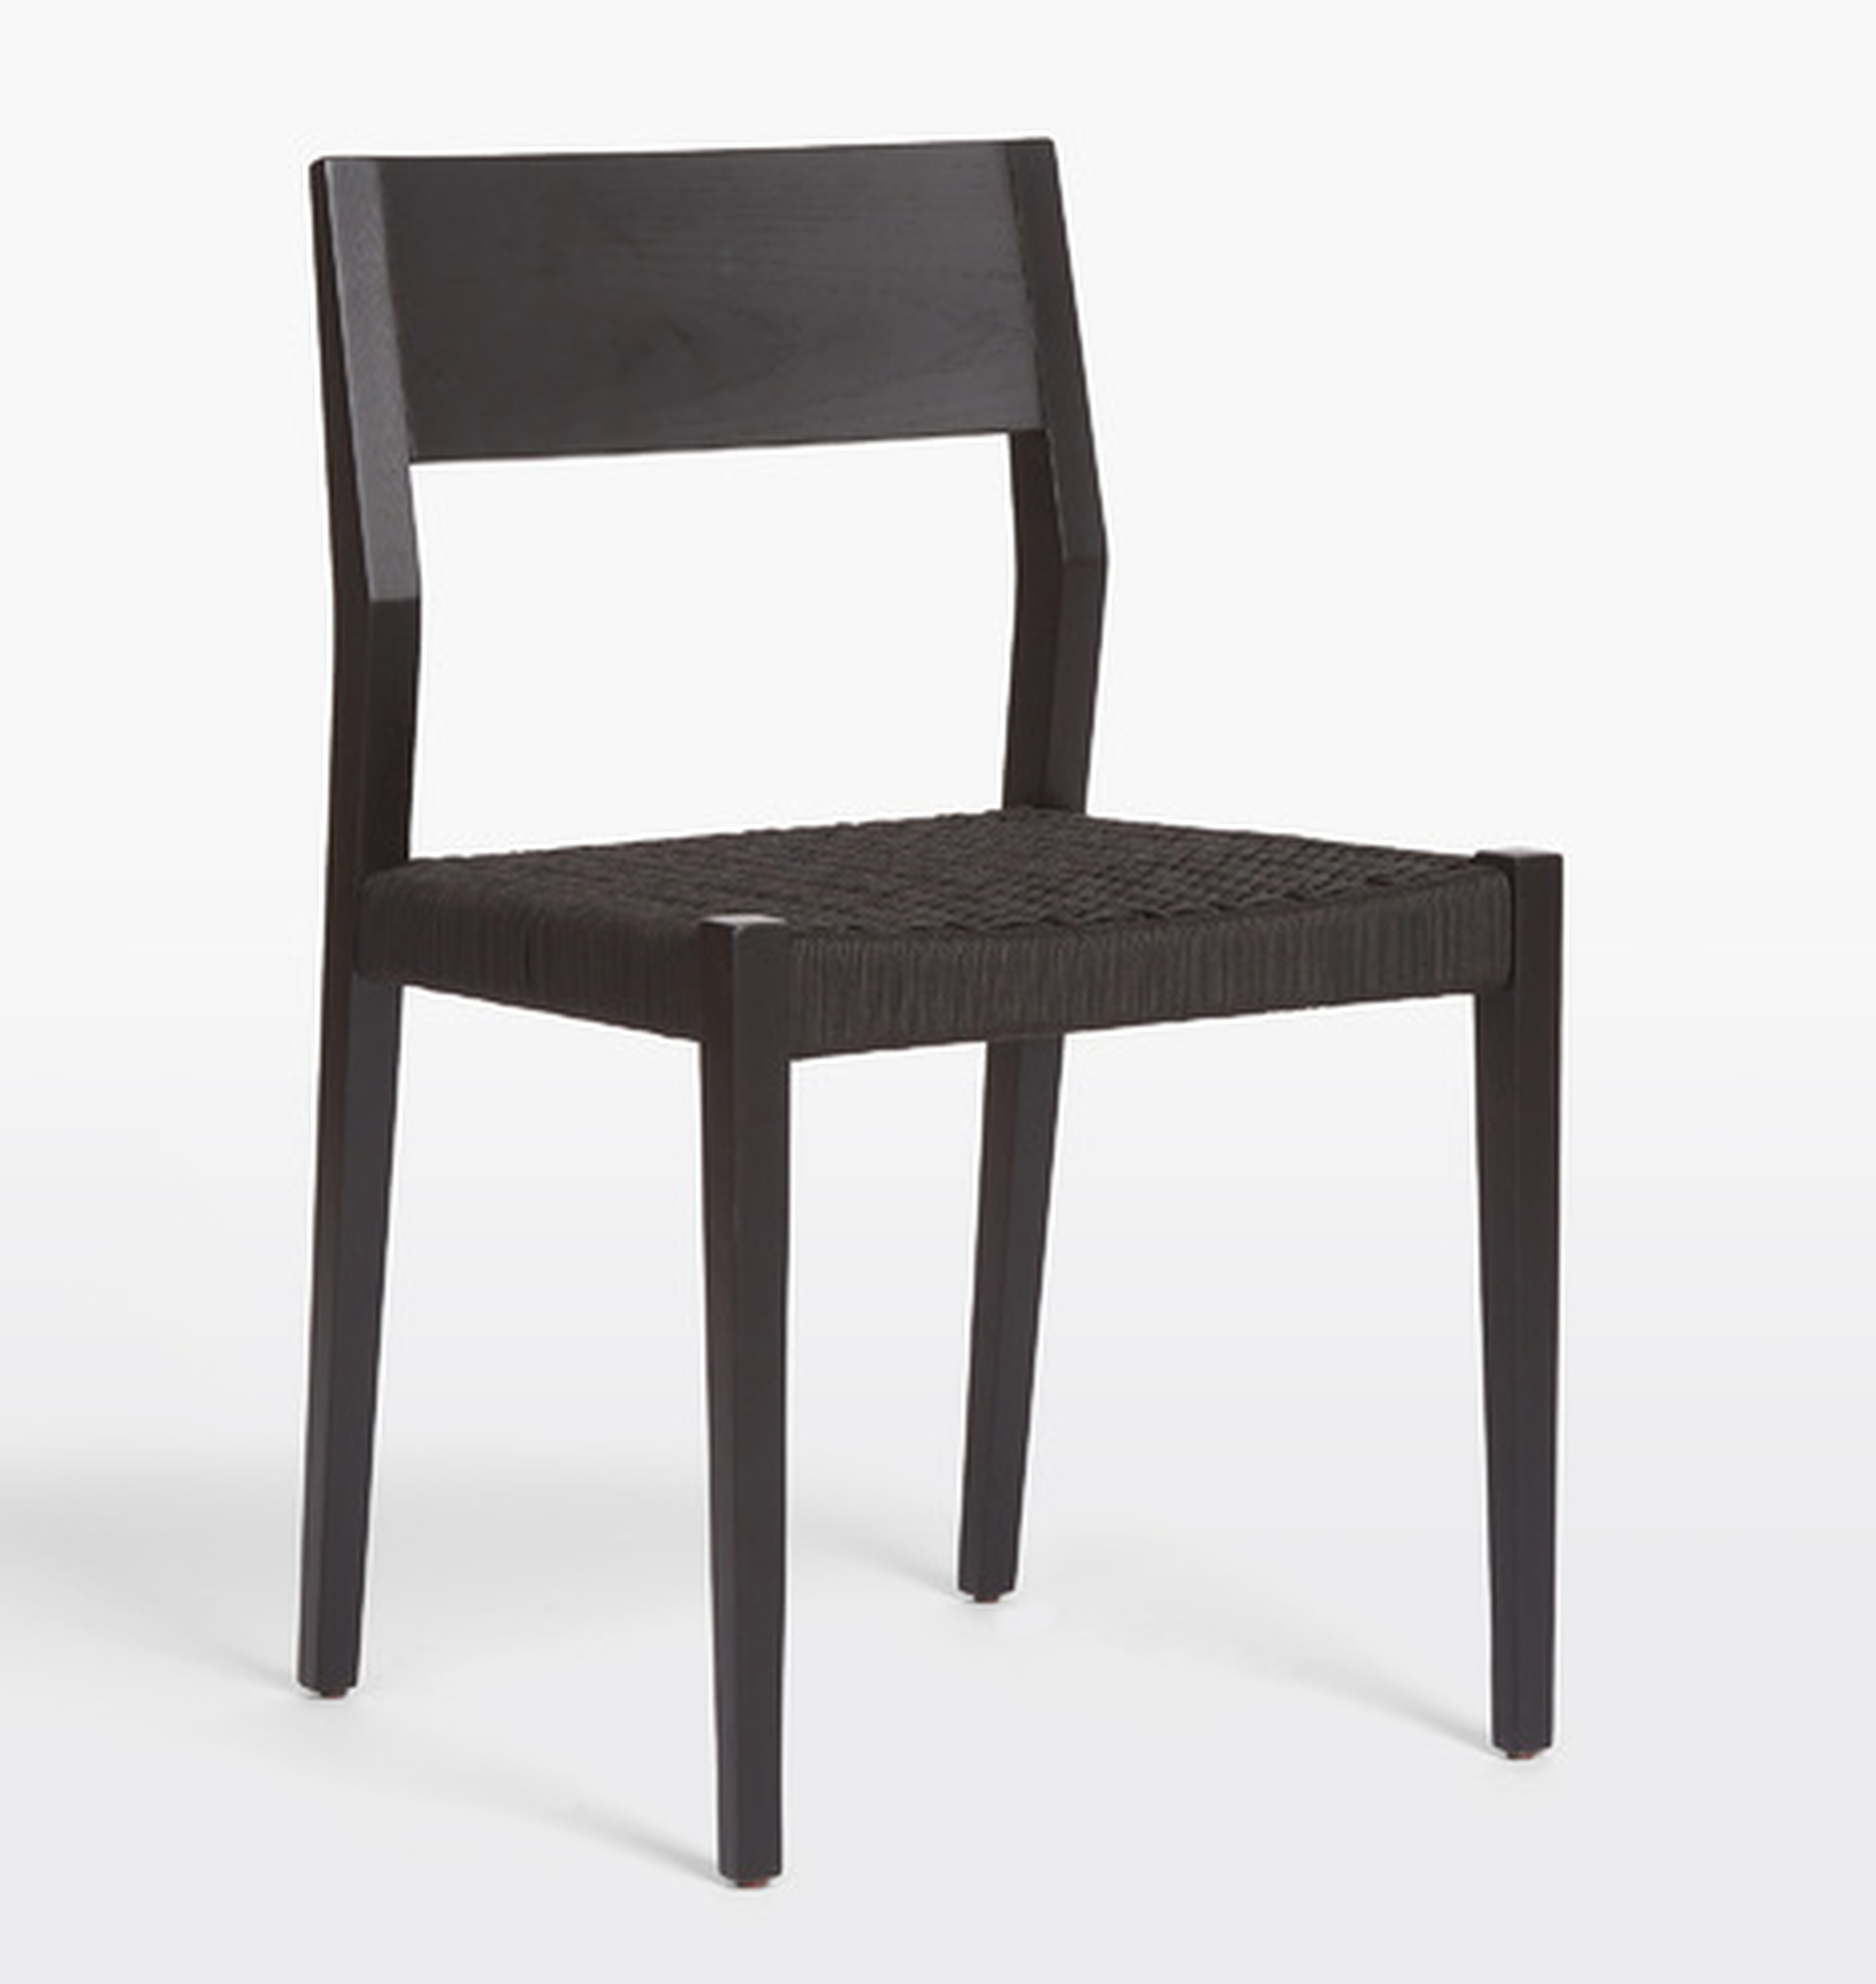 Bayley Black Ash Side Chair with Woven Black Rope Seat - Rejuvenation